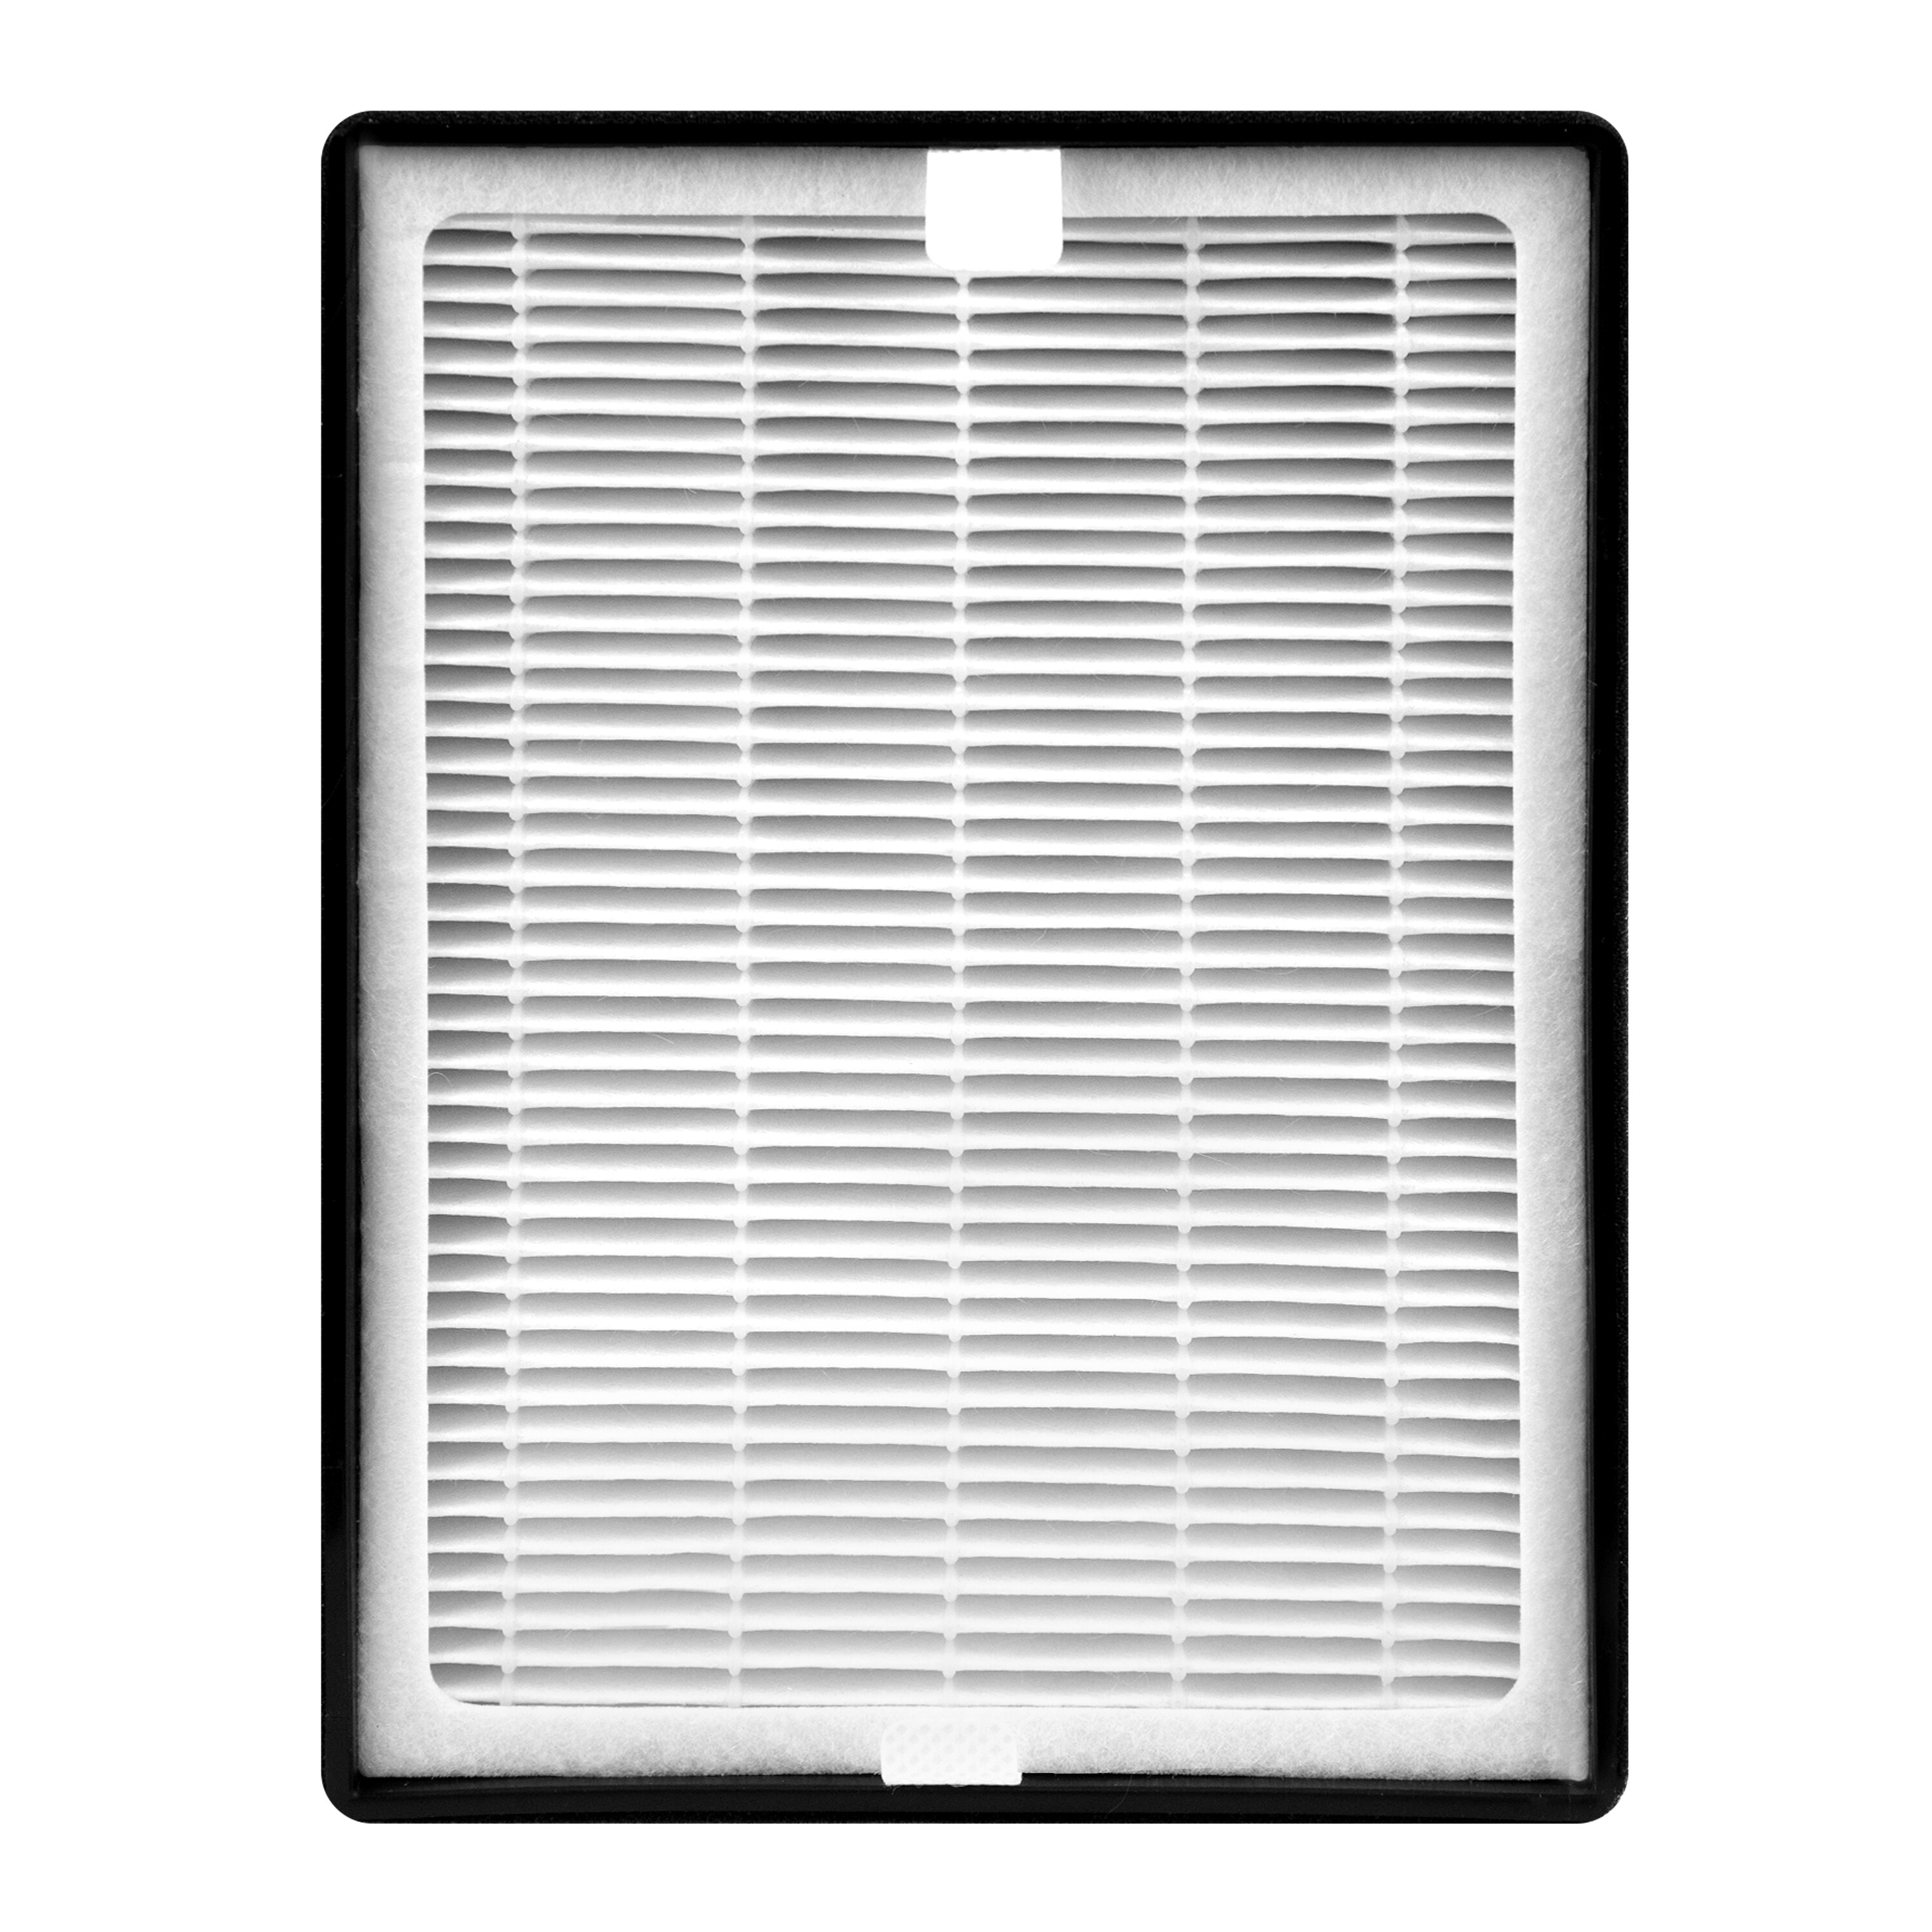 Levoit Lv-h126 Air Purifier for Home with True HEPA Filter, Cleaner